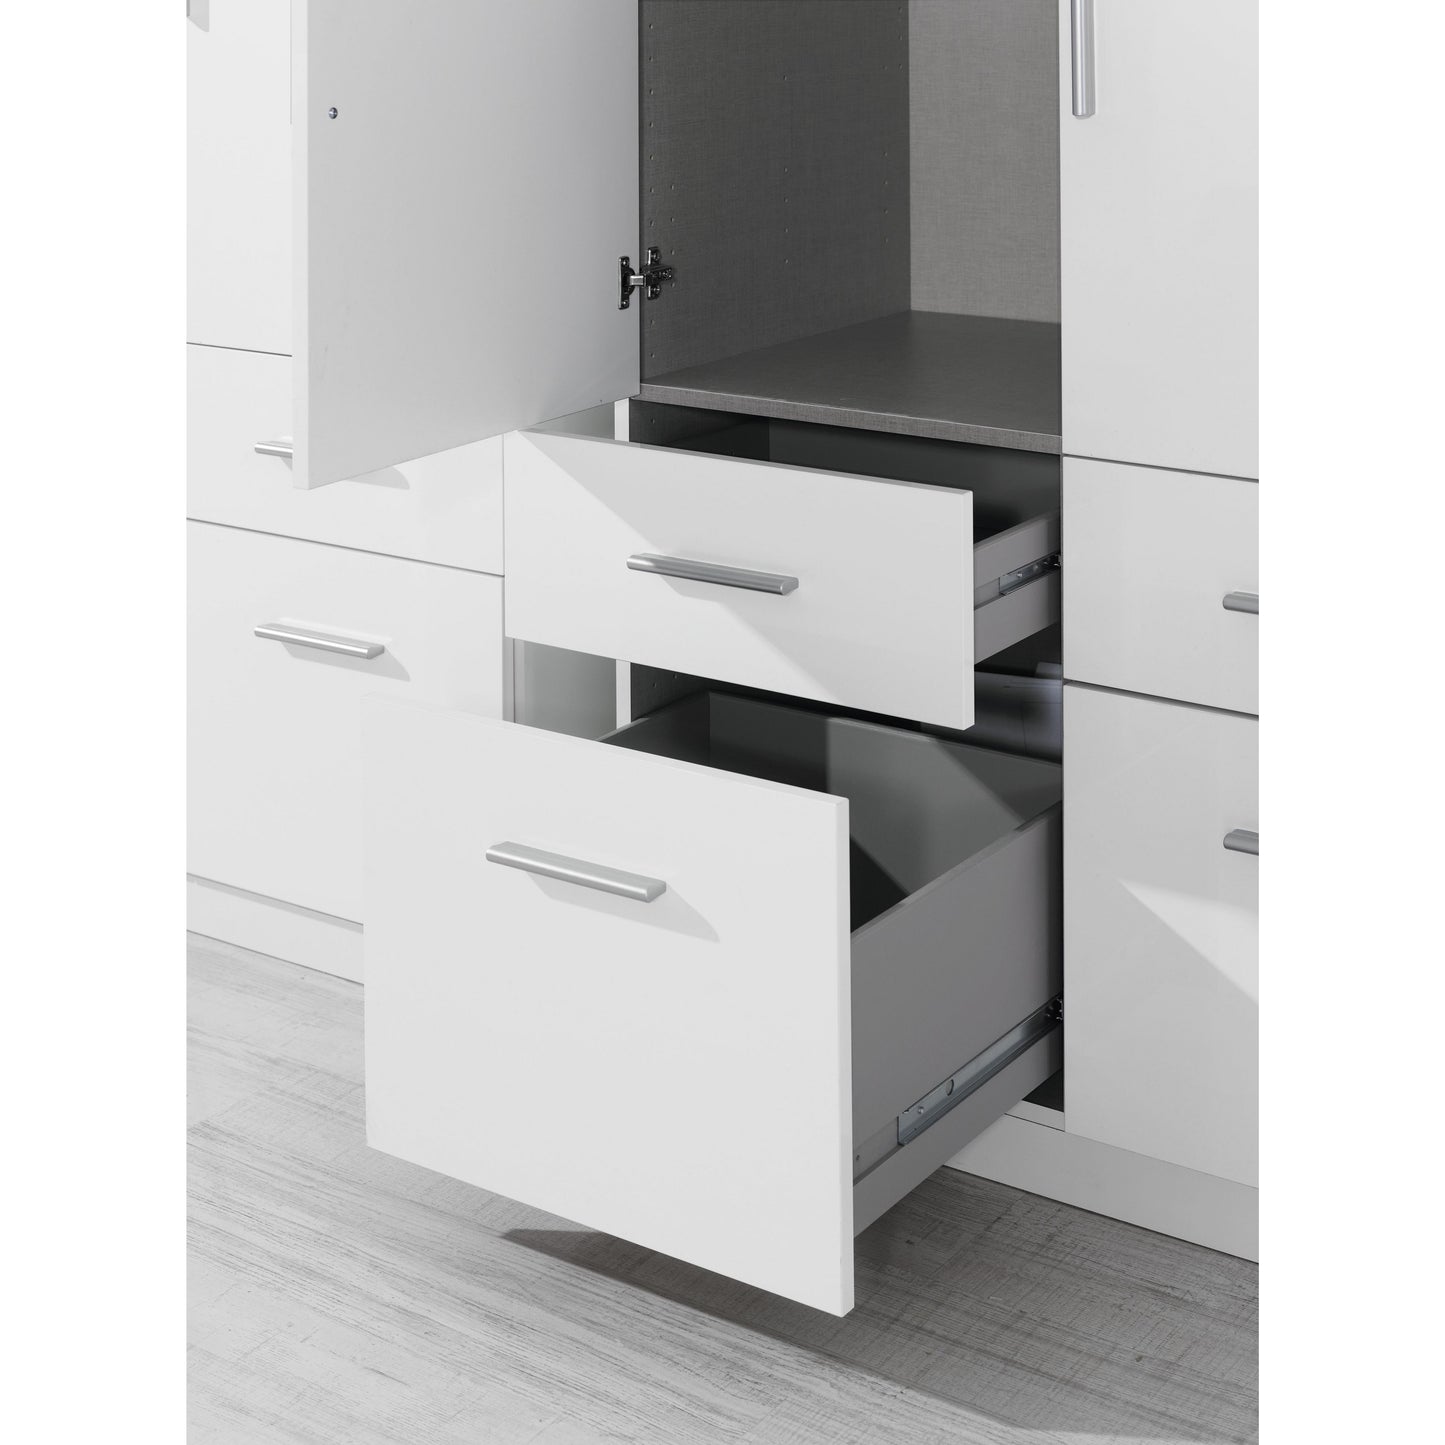 Celline High Gloss White 1 Door Wardrobe with Drawers